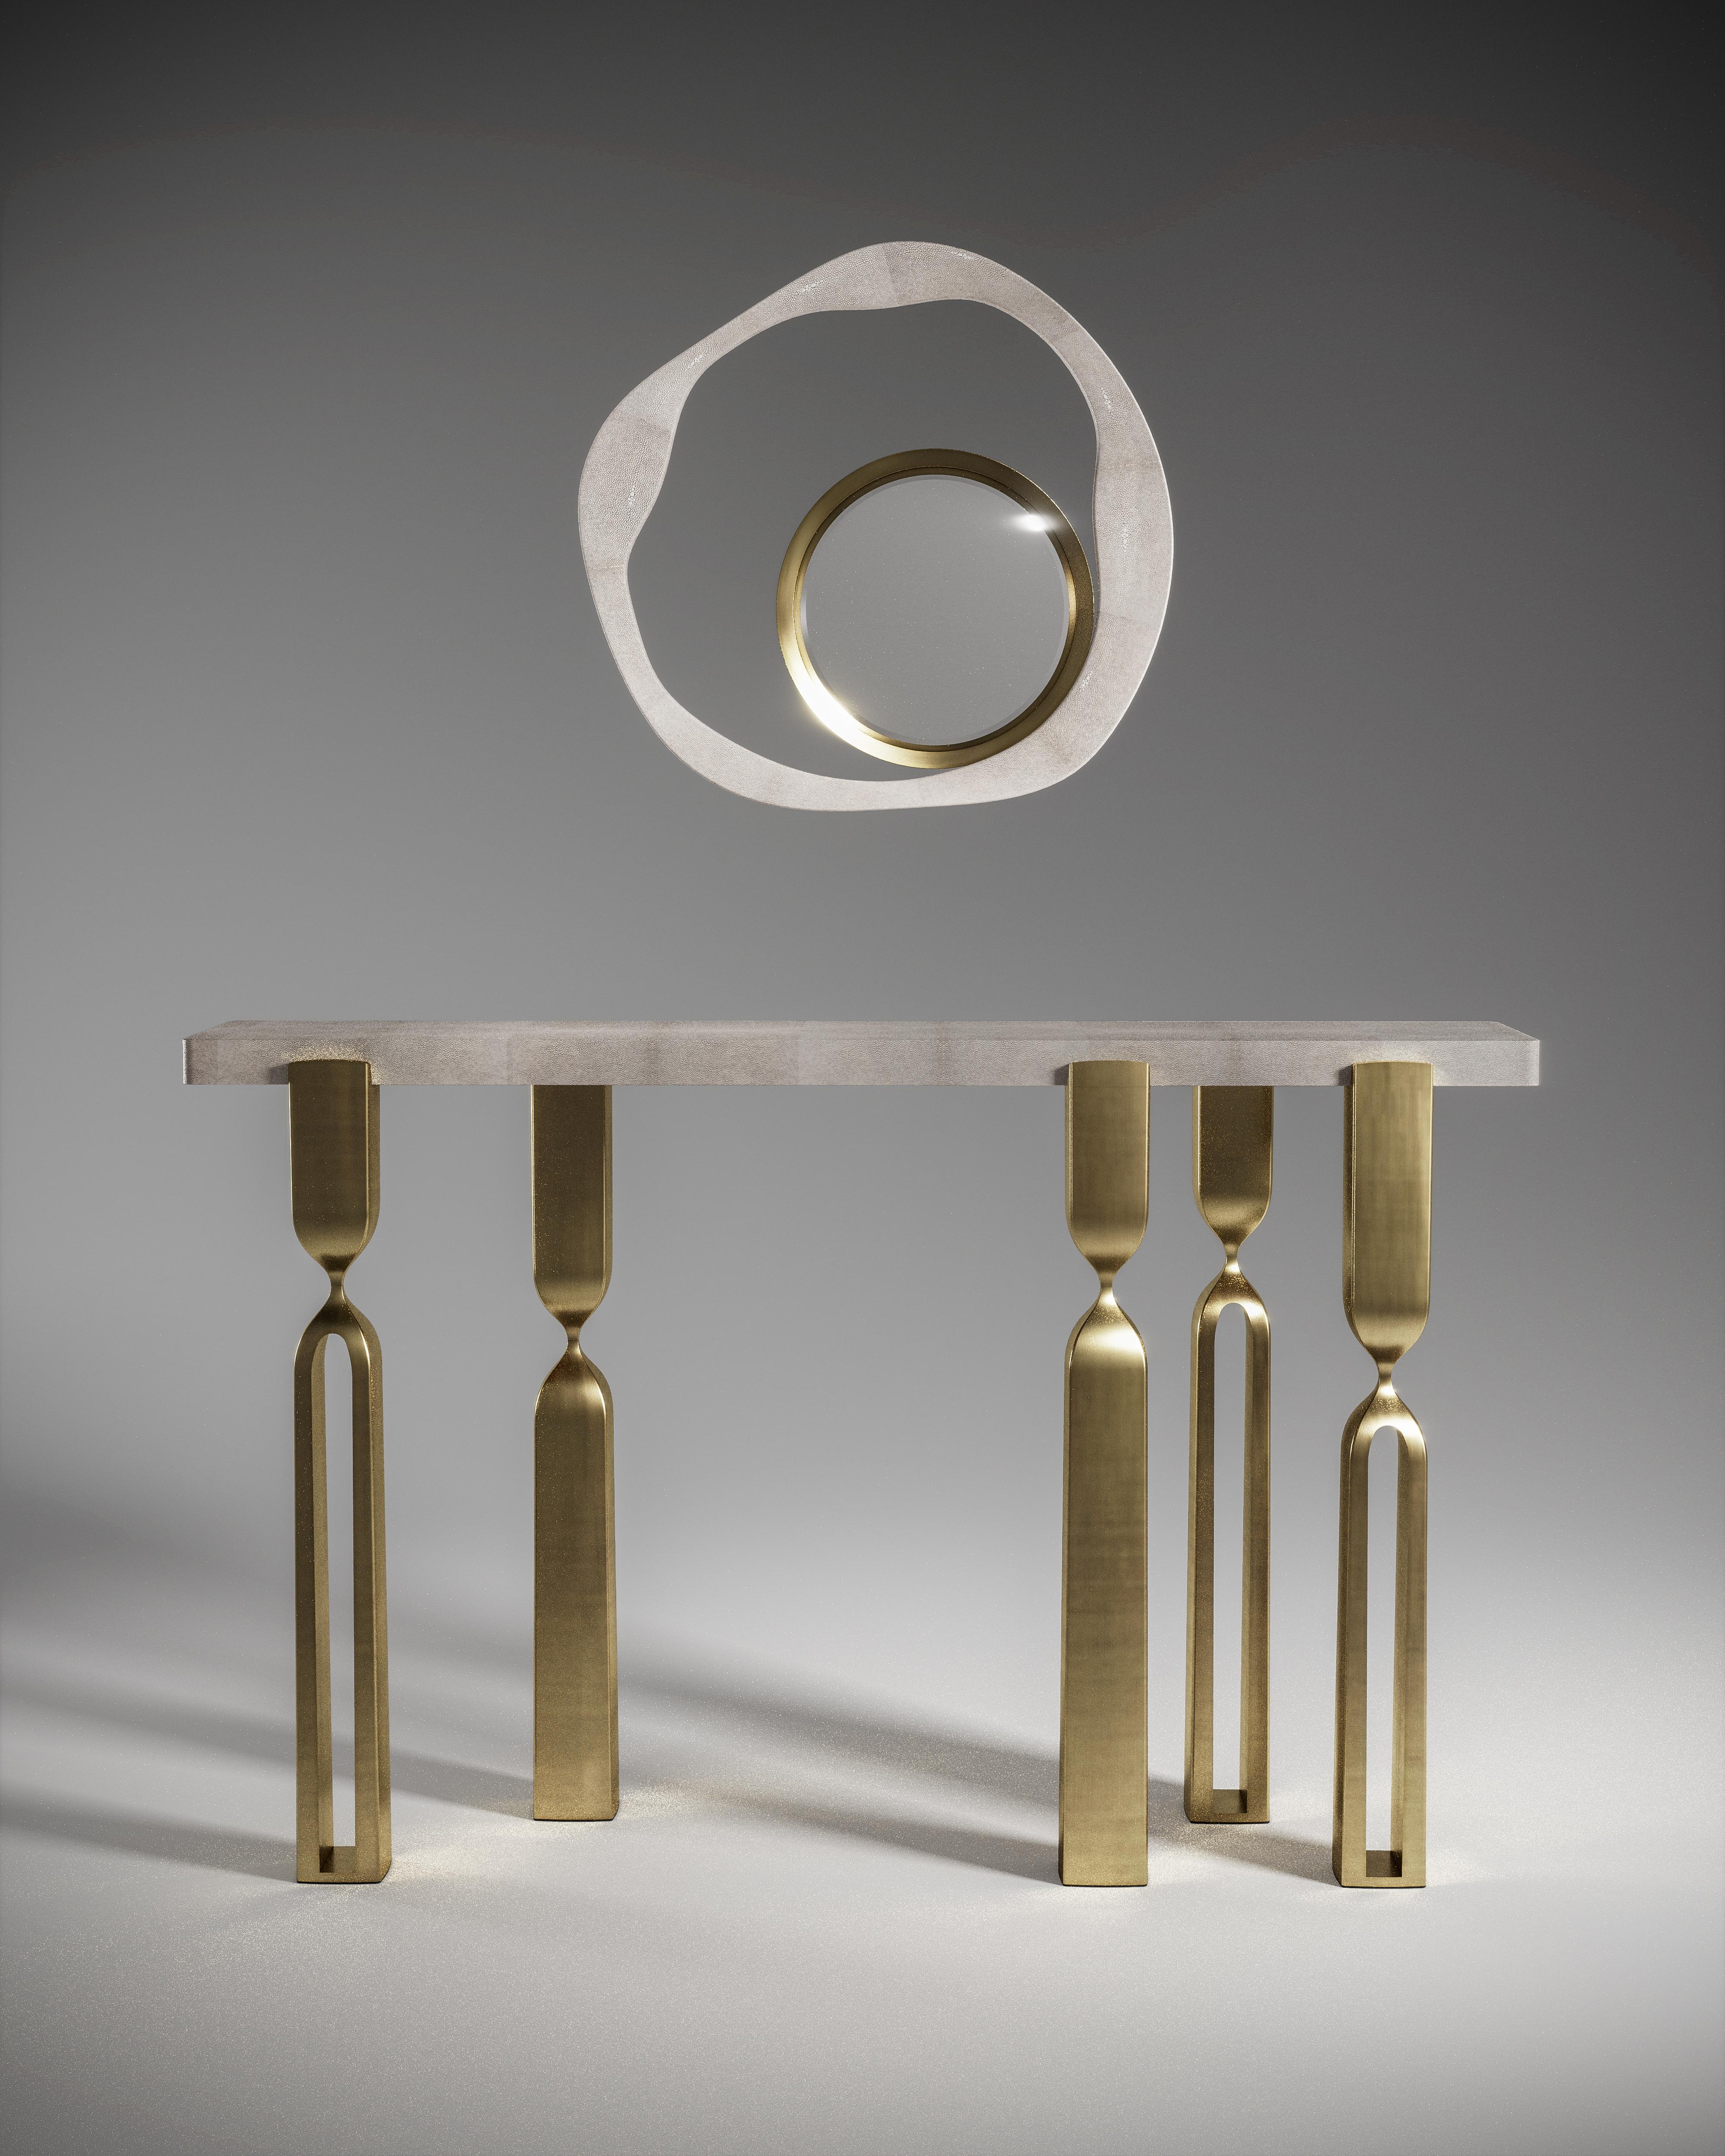 Inspired by the original Rhapsody lamp, by her fiancee Patrick Coard Paris, Kifu Paris designs a sculptural console as an ode to his iconic lighting collection. The console tabletop is inlaid in cream shagreen and sits on 5 bronze-patina brass